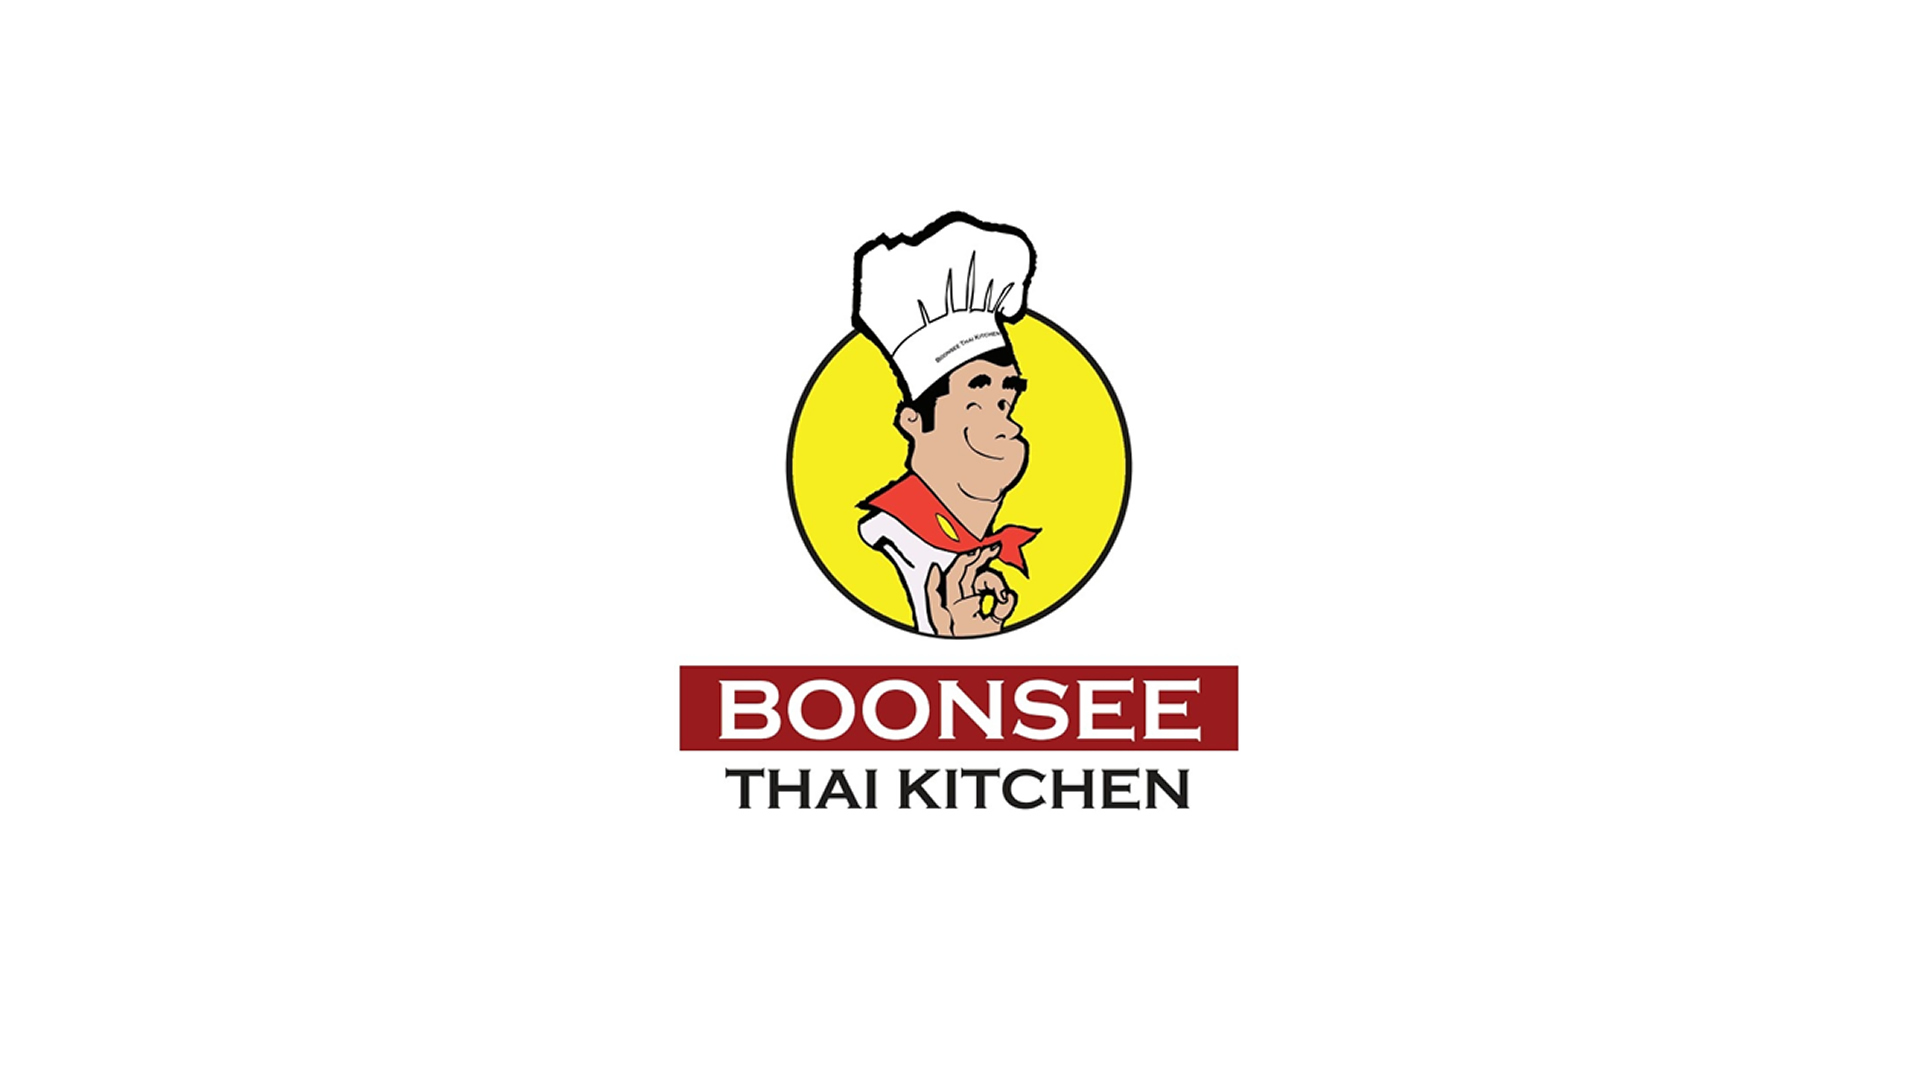 Welcome to BoonSee Thai Kitchen